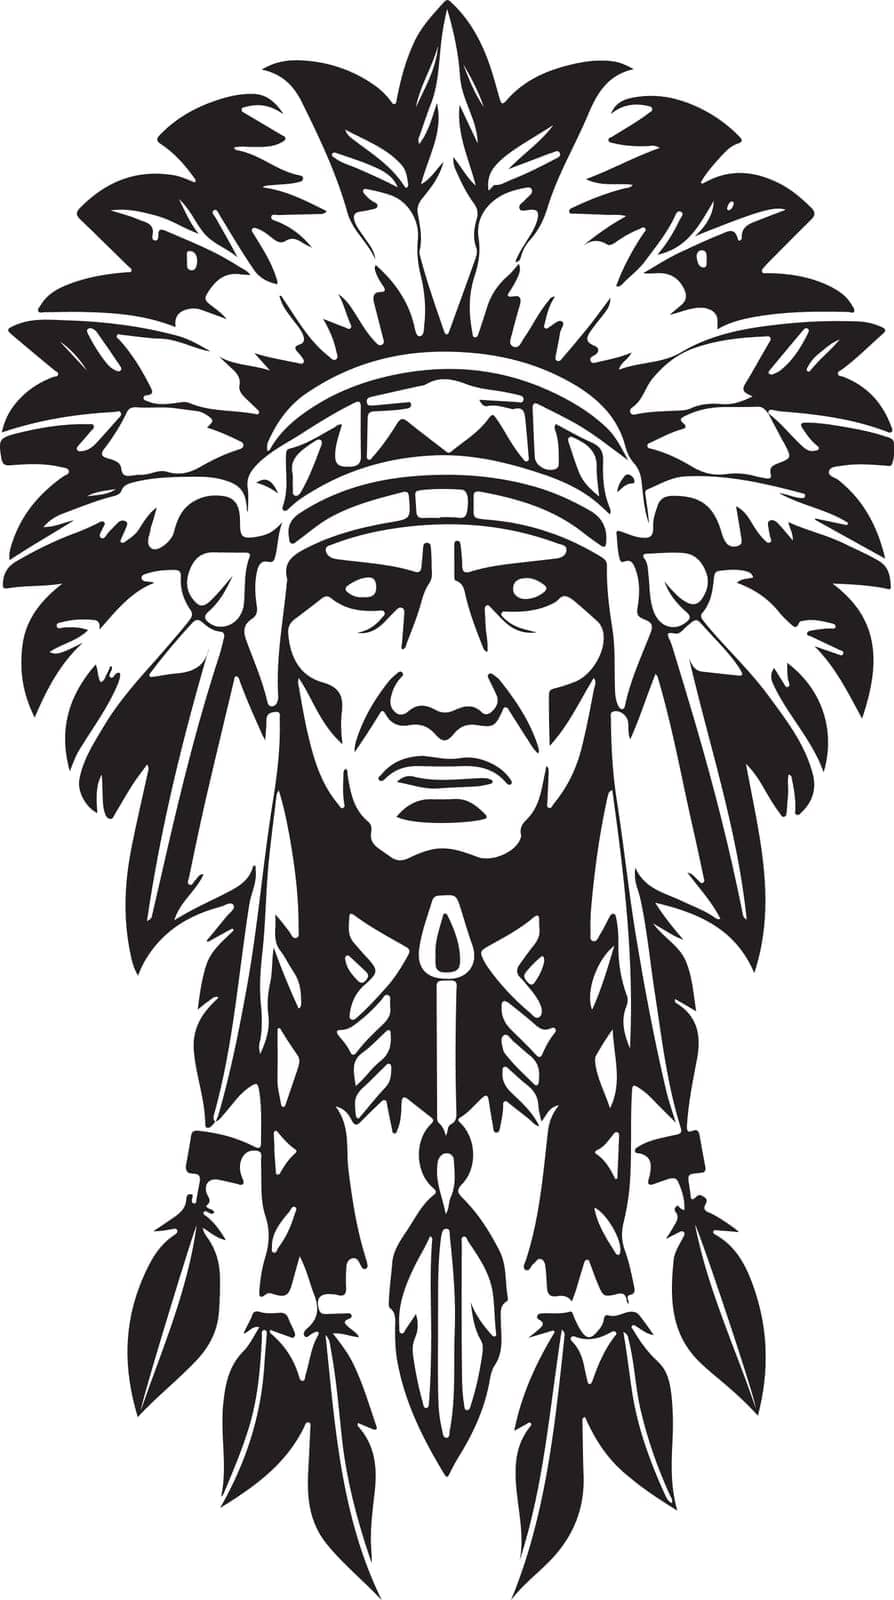 A Breathtaking iconic Native American chief in a black and white vector illustration, Suitable for logo design, tattoo design or print on demand by luisalfonso89